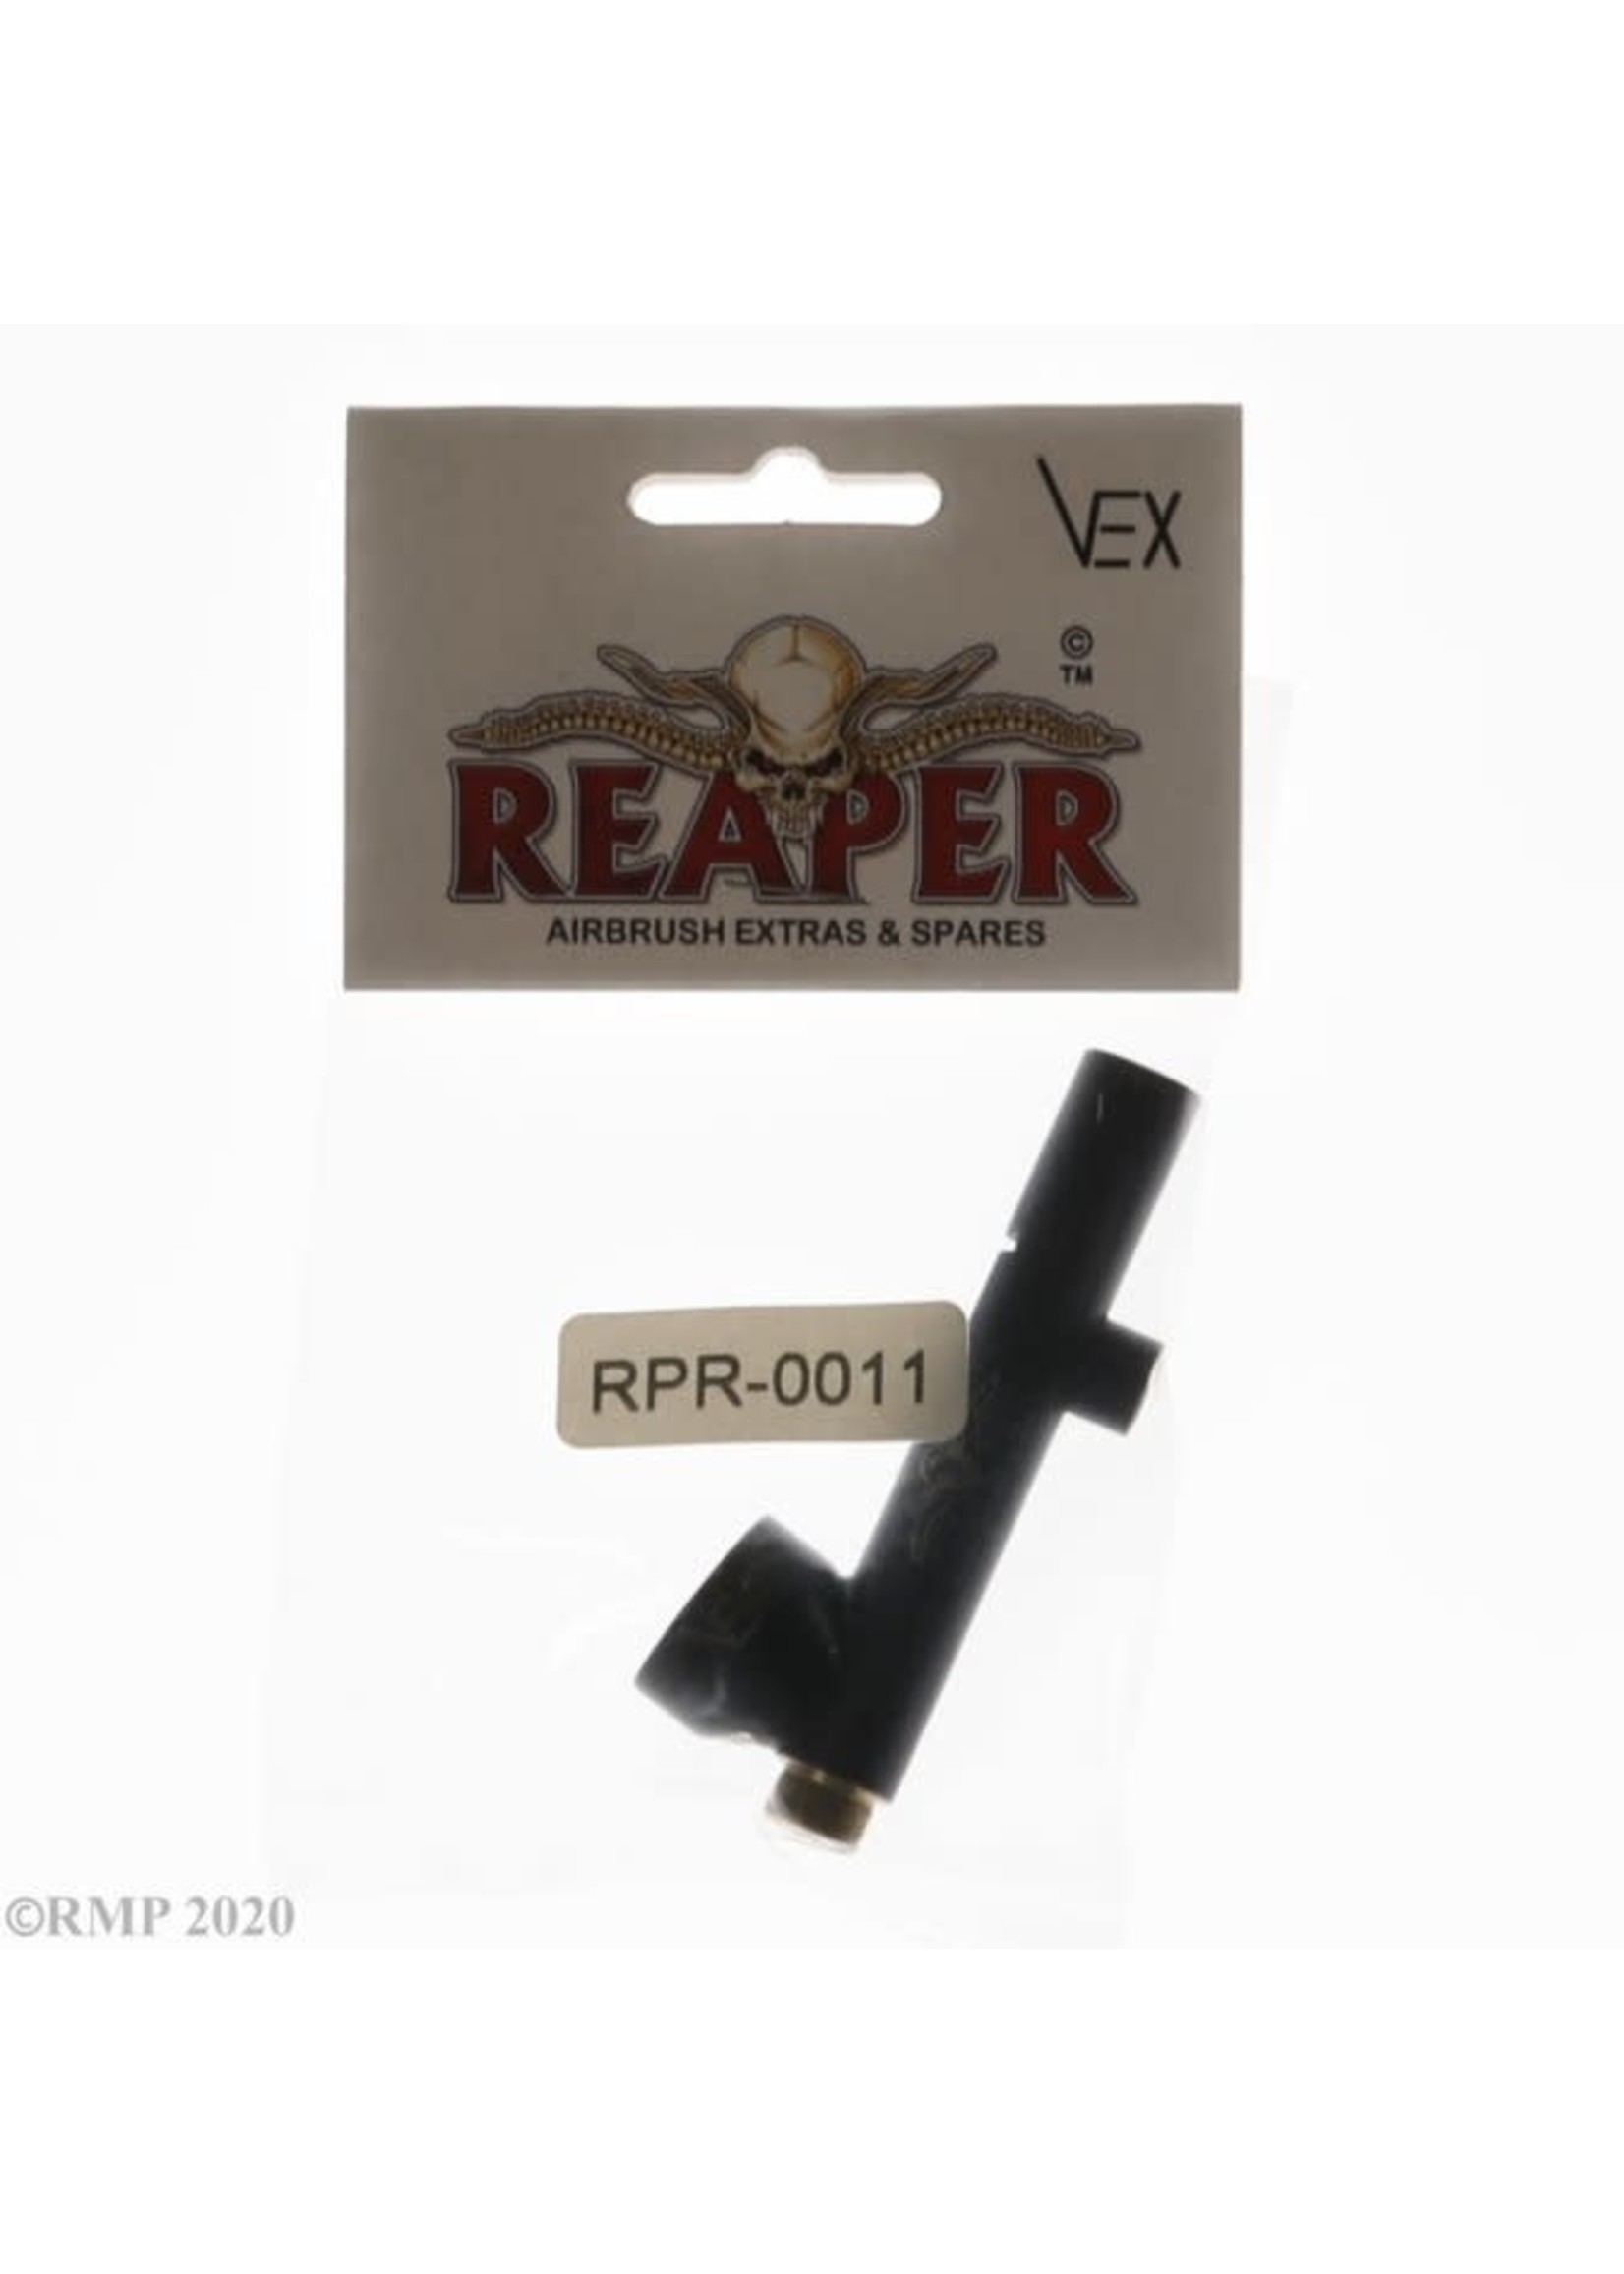 Reaper Reaper Vex Jet Airbrush Body - Small Color Cup